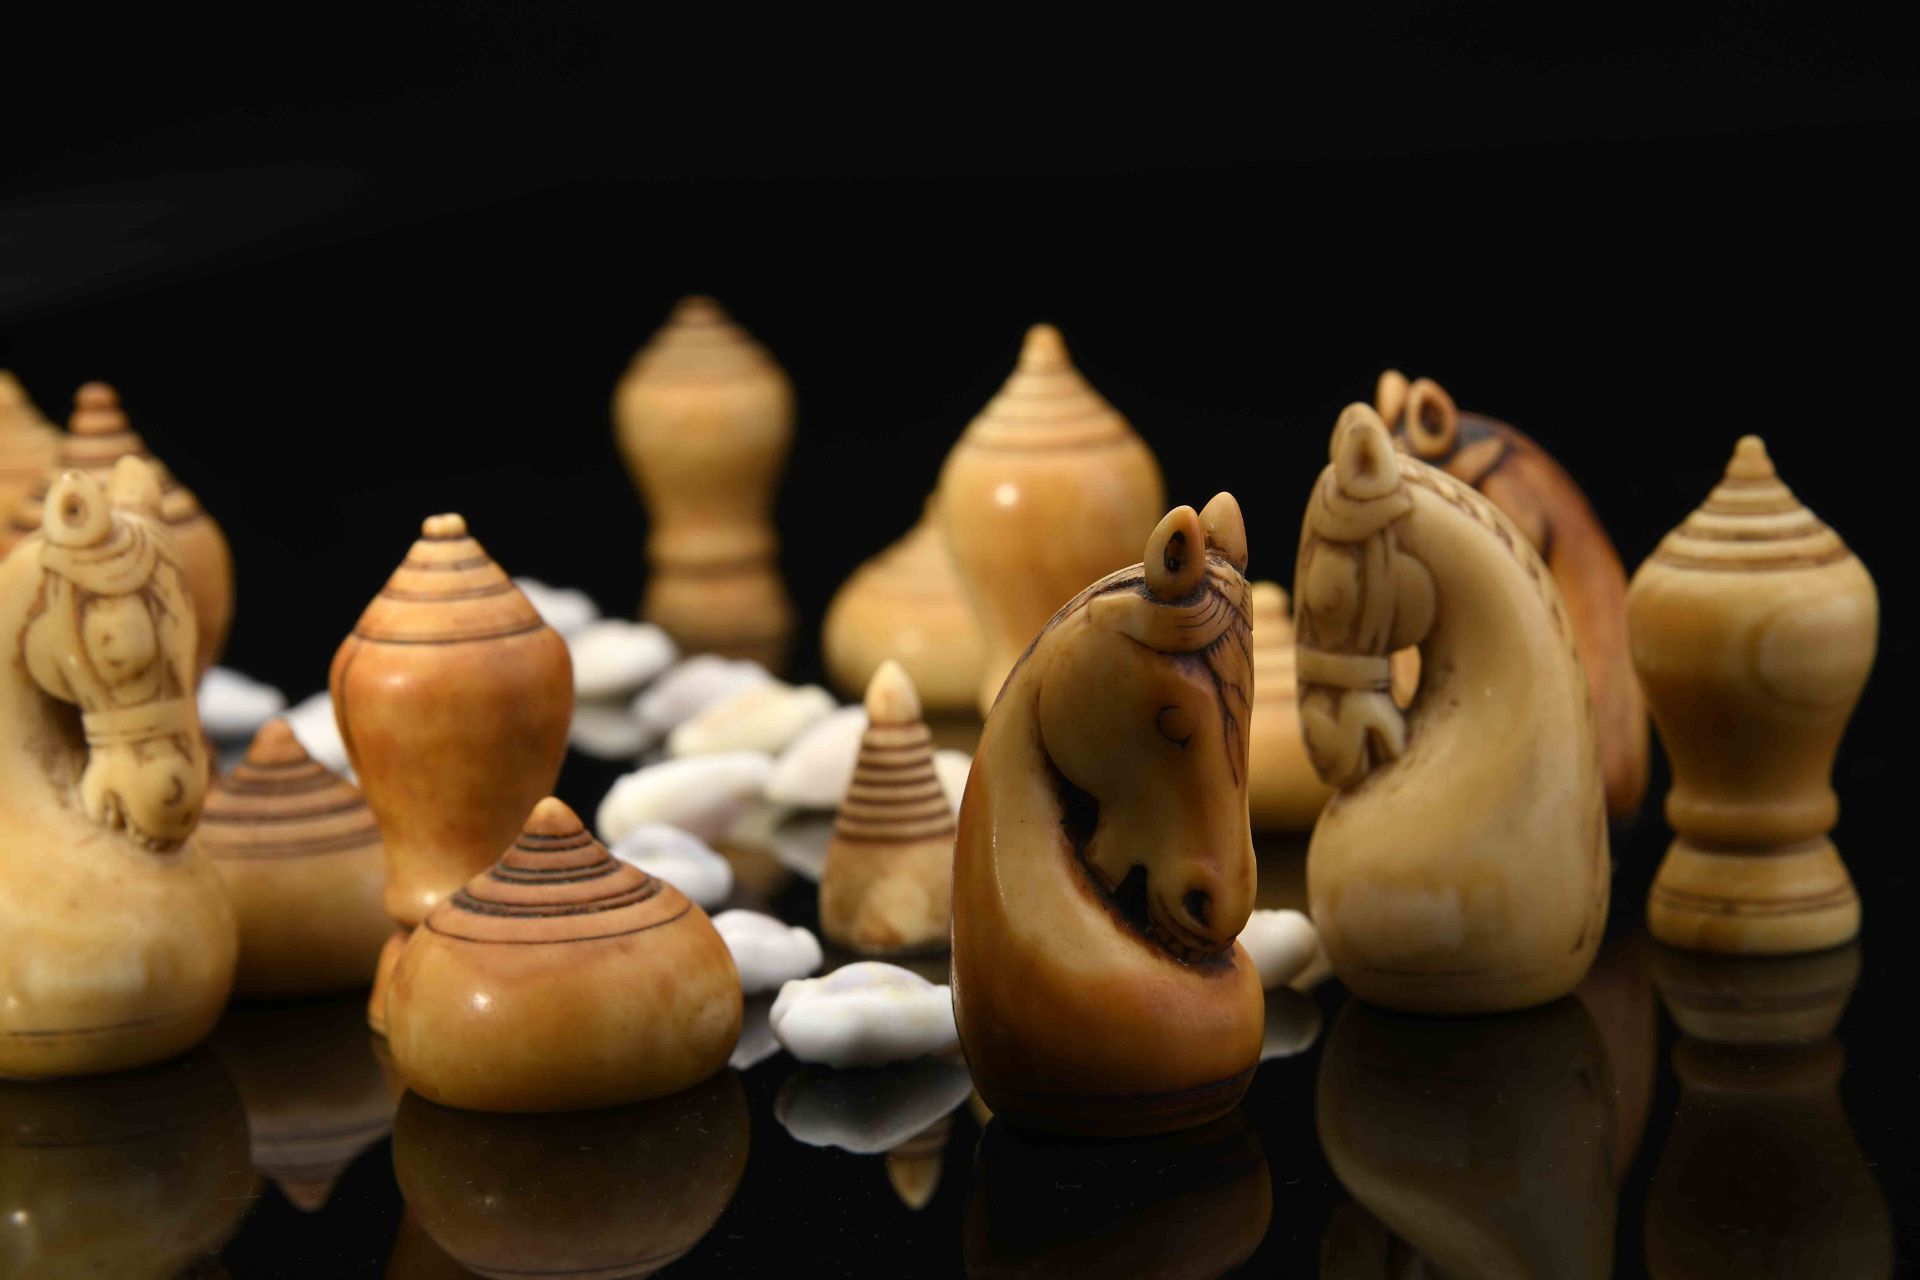 Chess pieces - Image 3 of 6